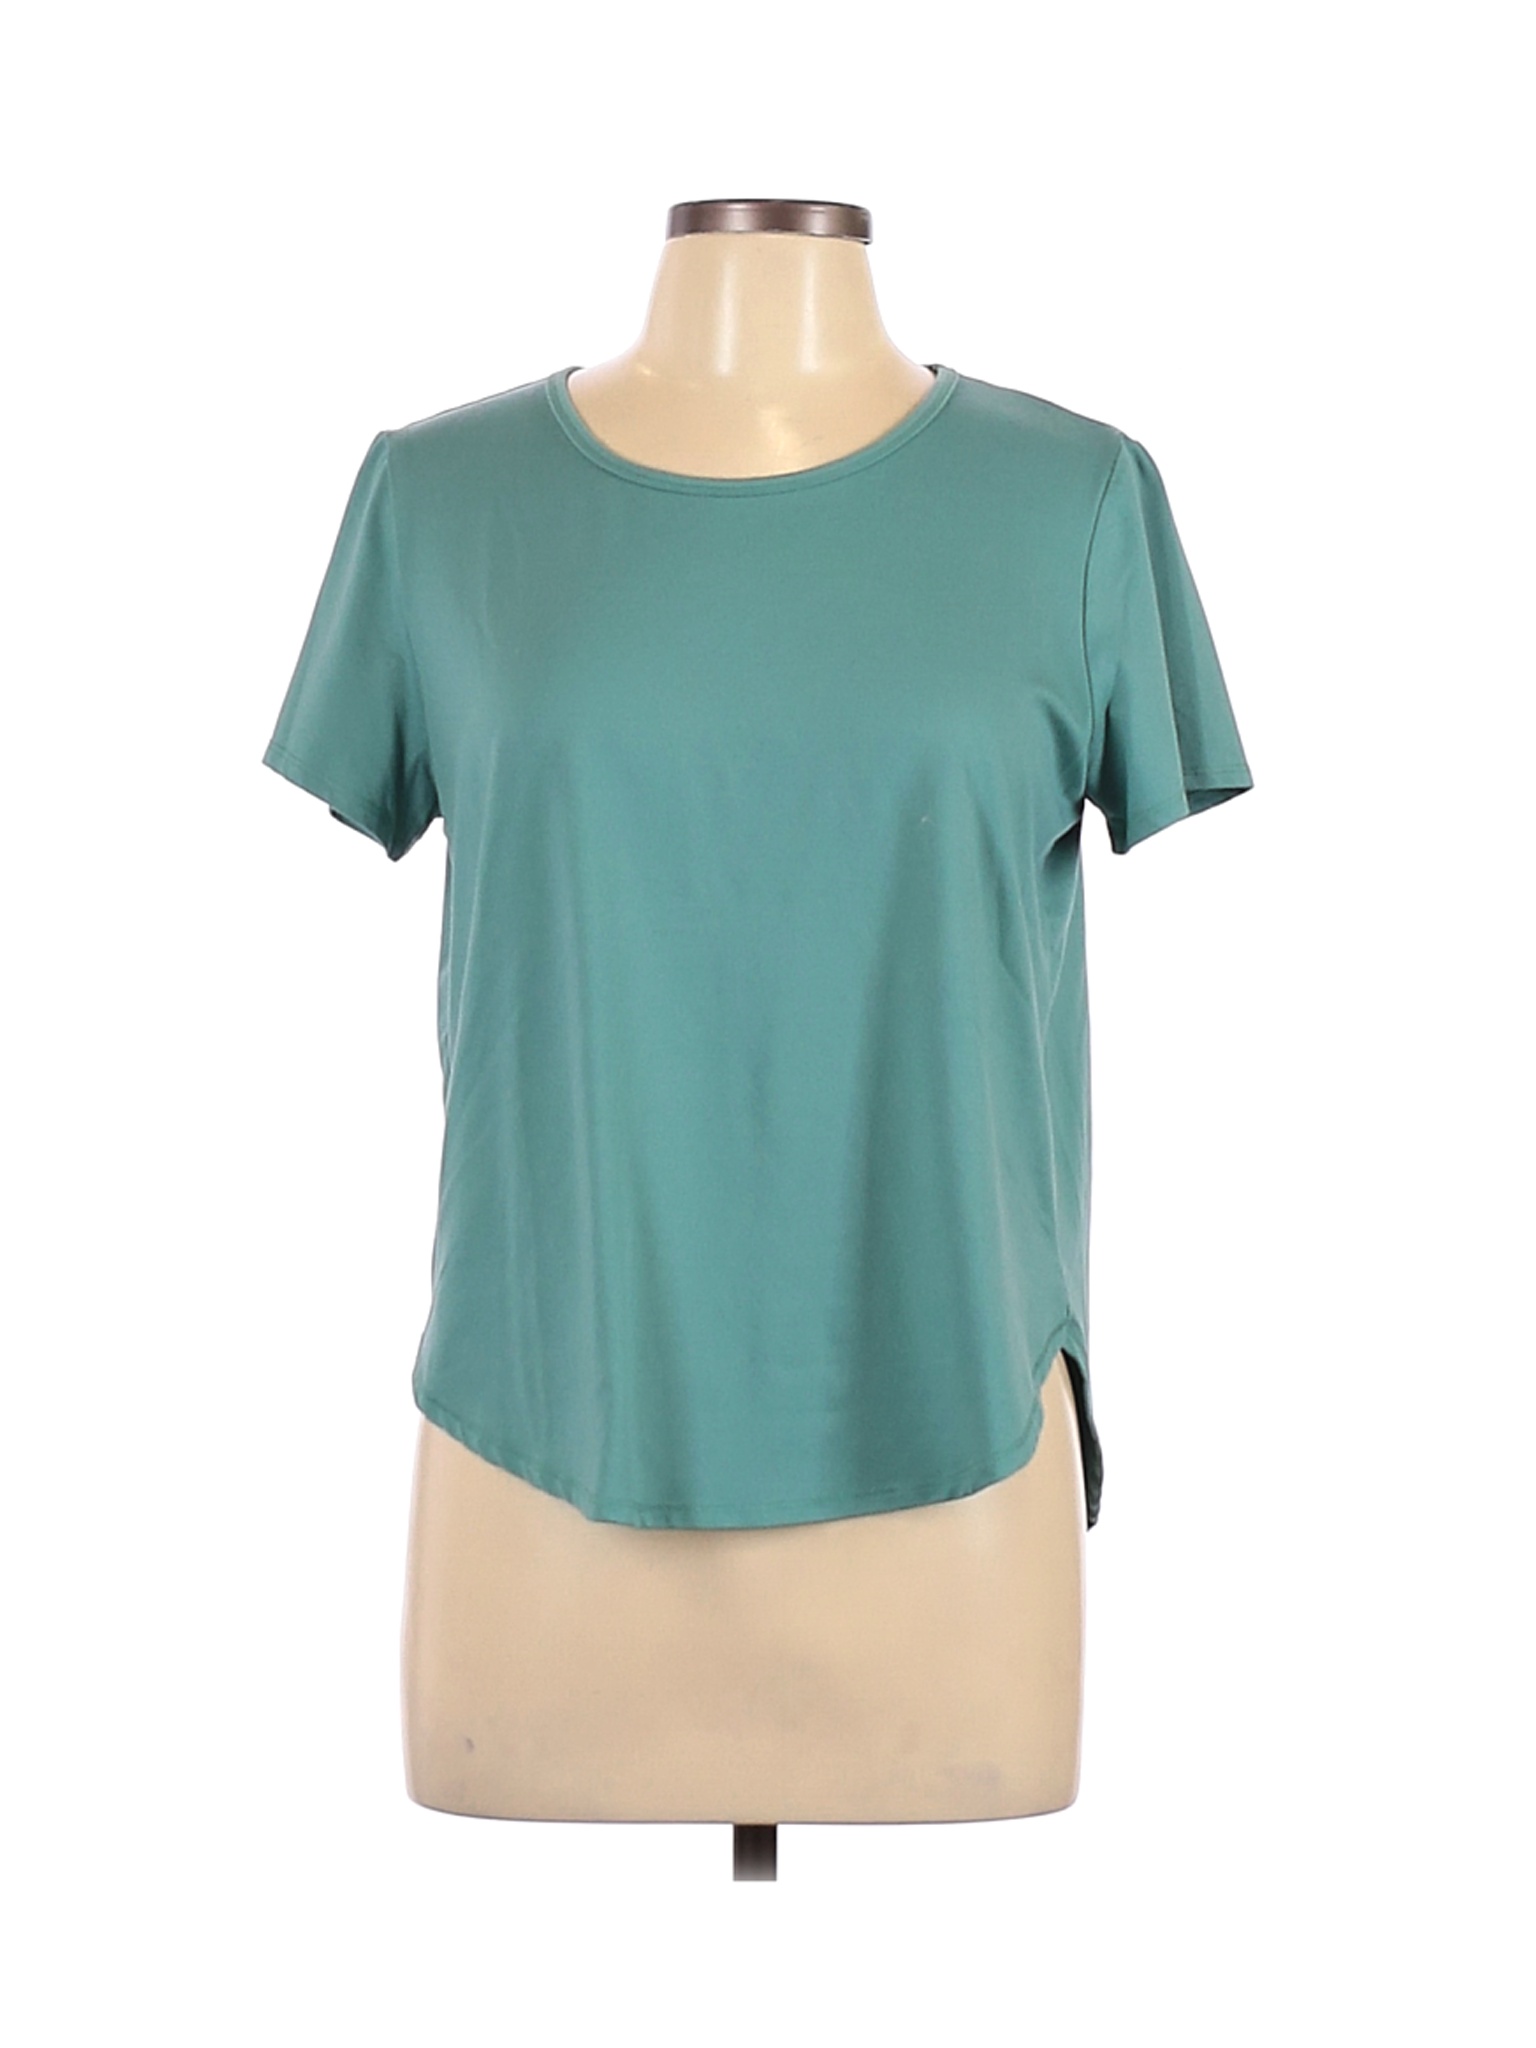 All in motion Women Green Active T-Shirt L | eBay